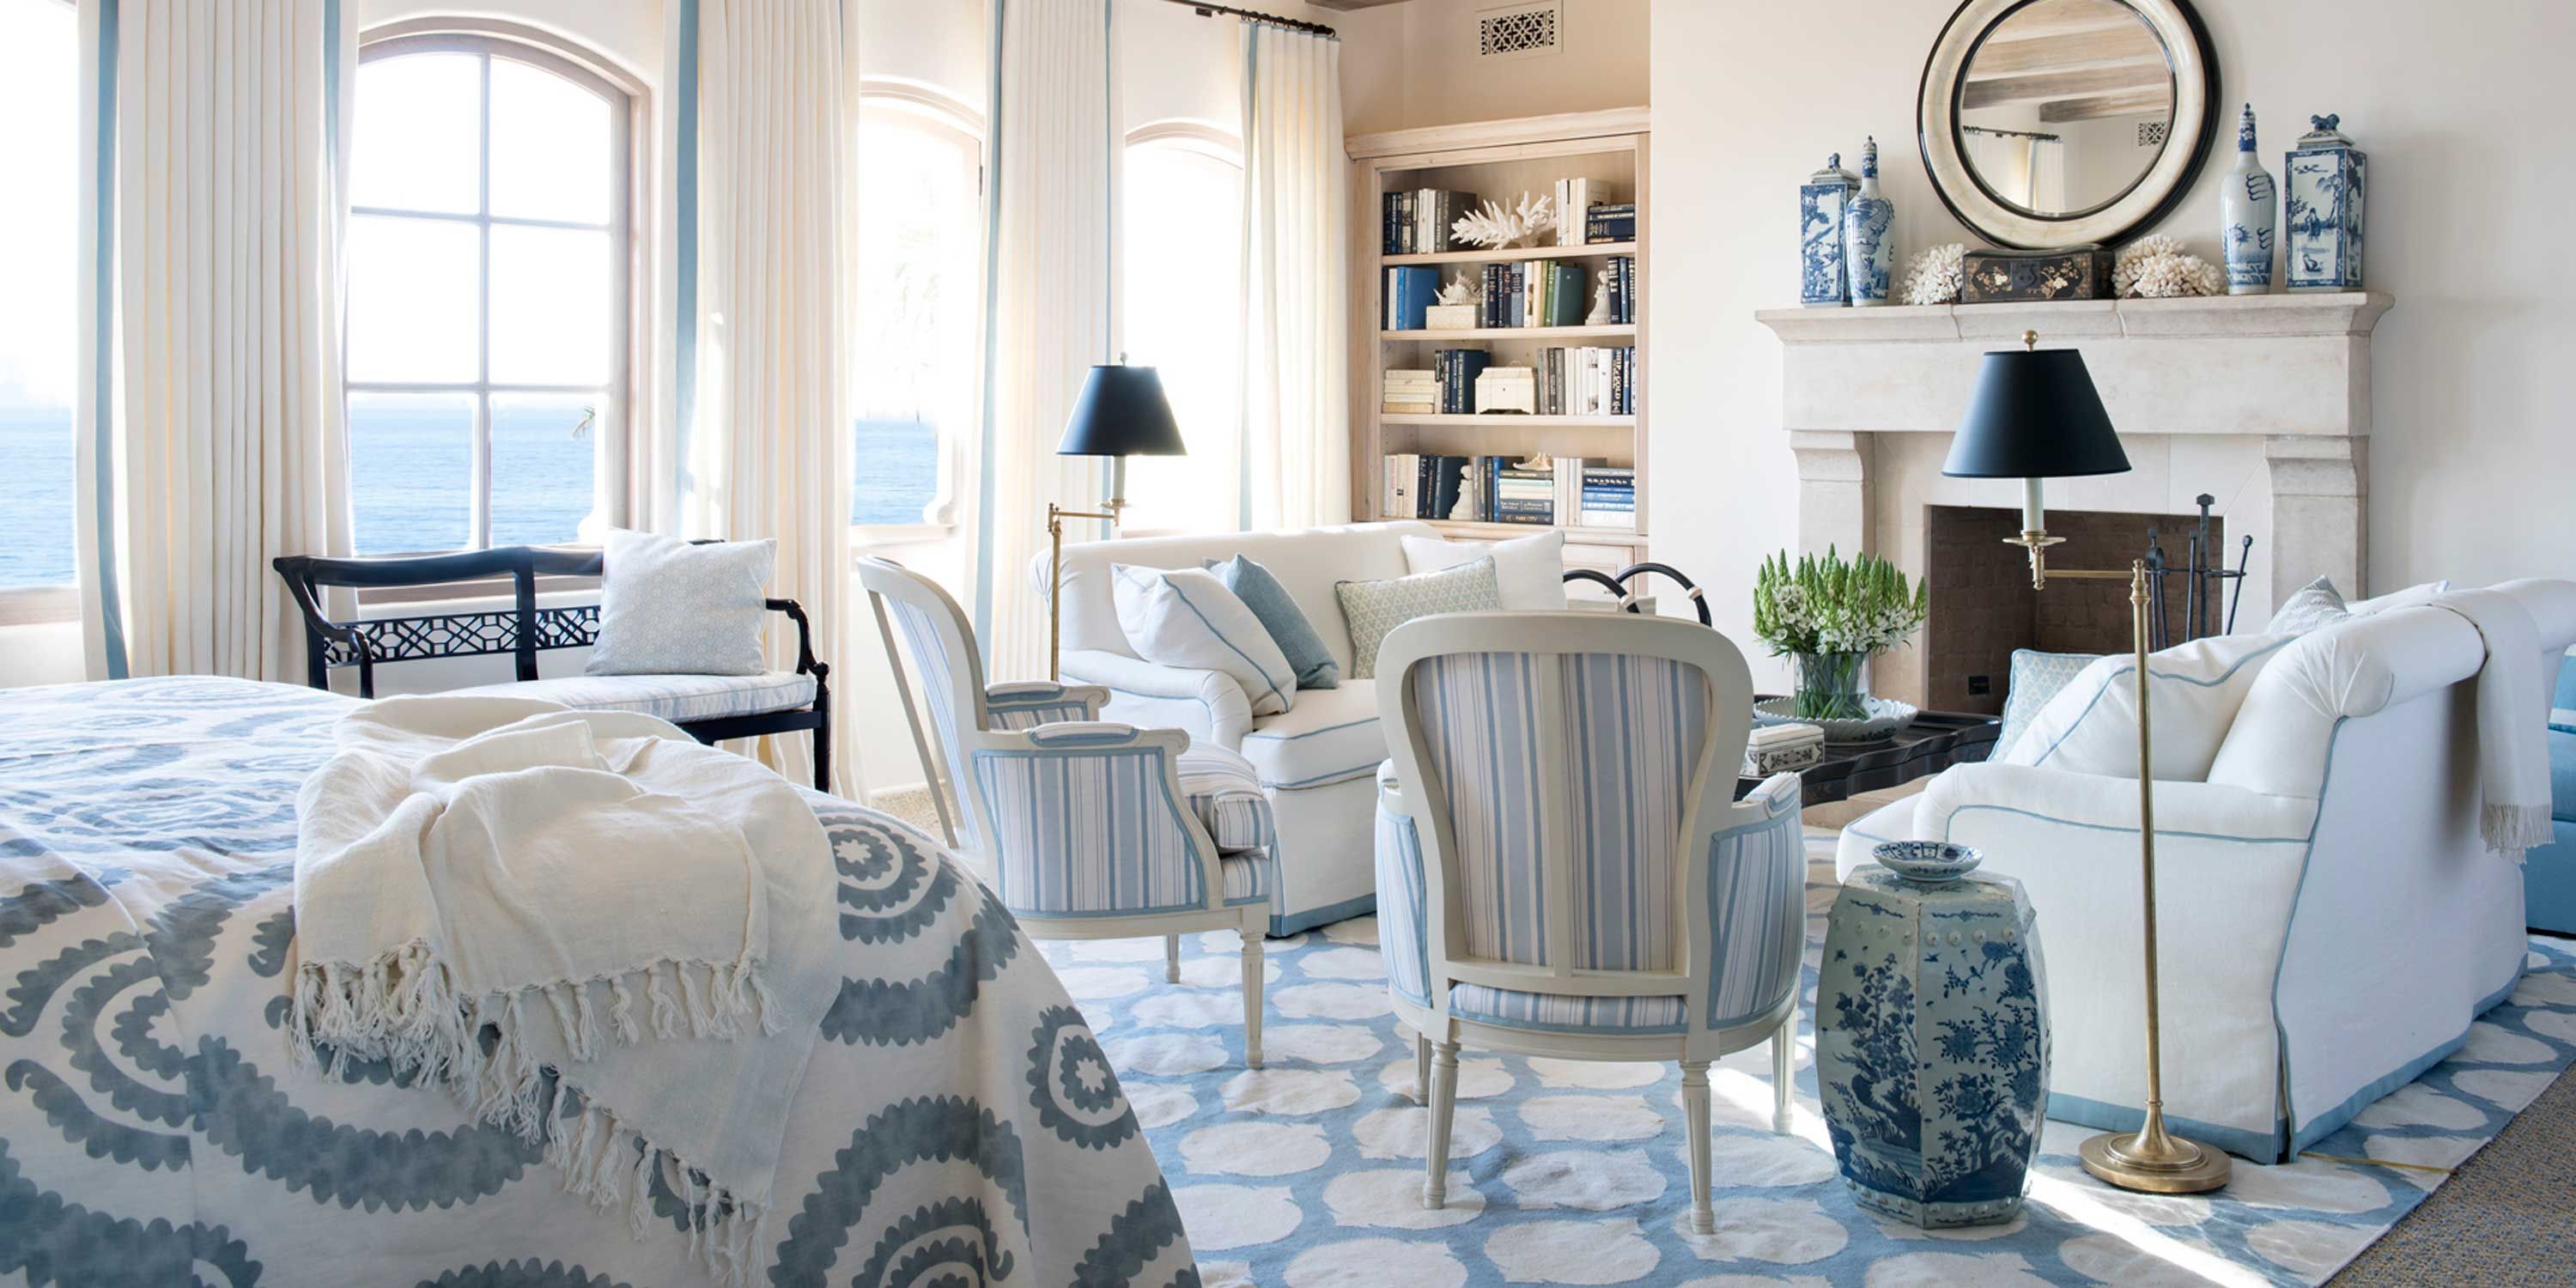 Blue And White Rooms - Decorating With Blue And White